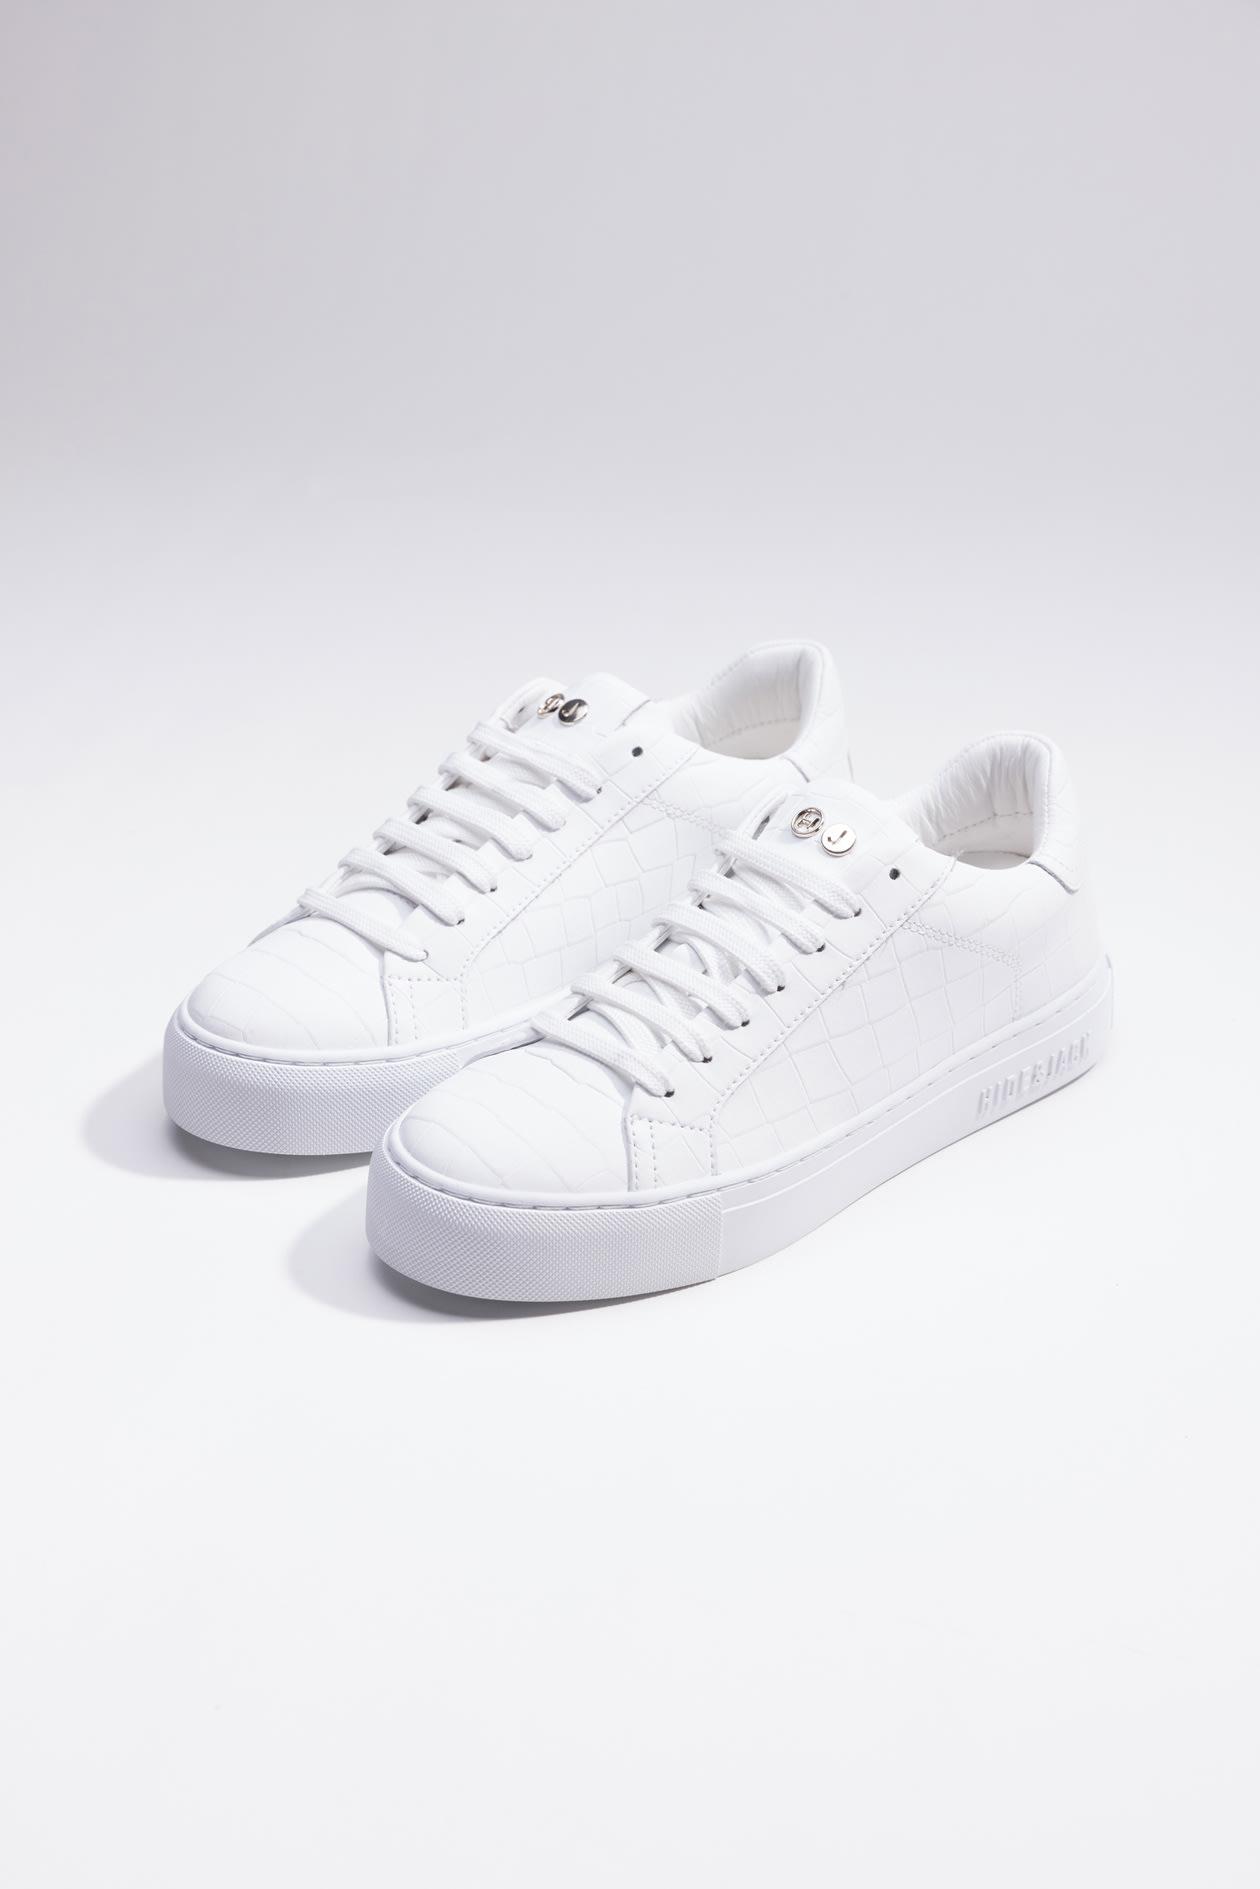 Hide&amp;jack Low Top Sneaker - Essence Tuscany White